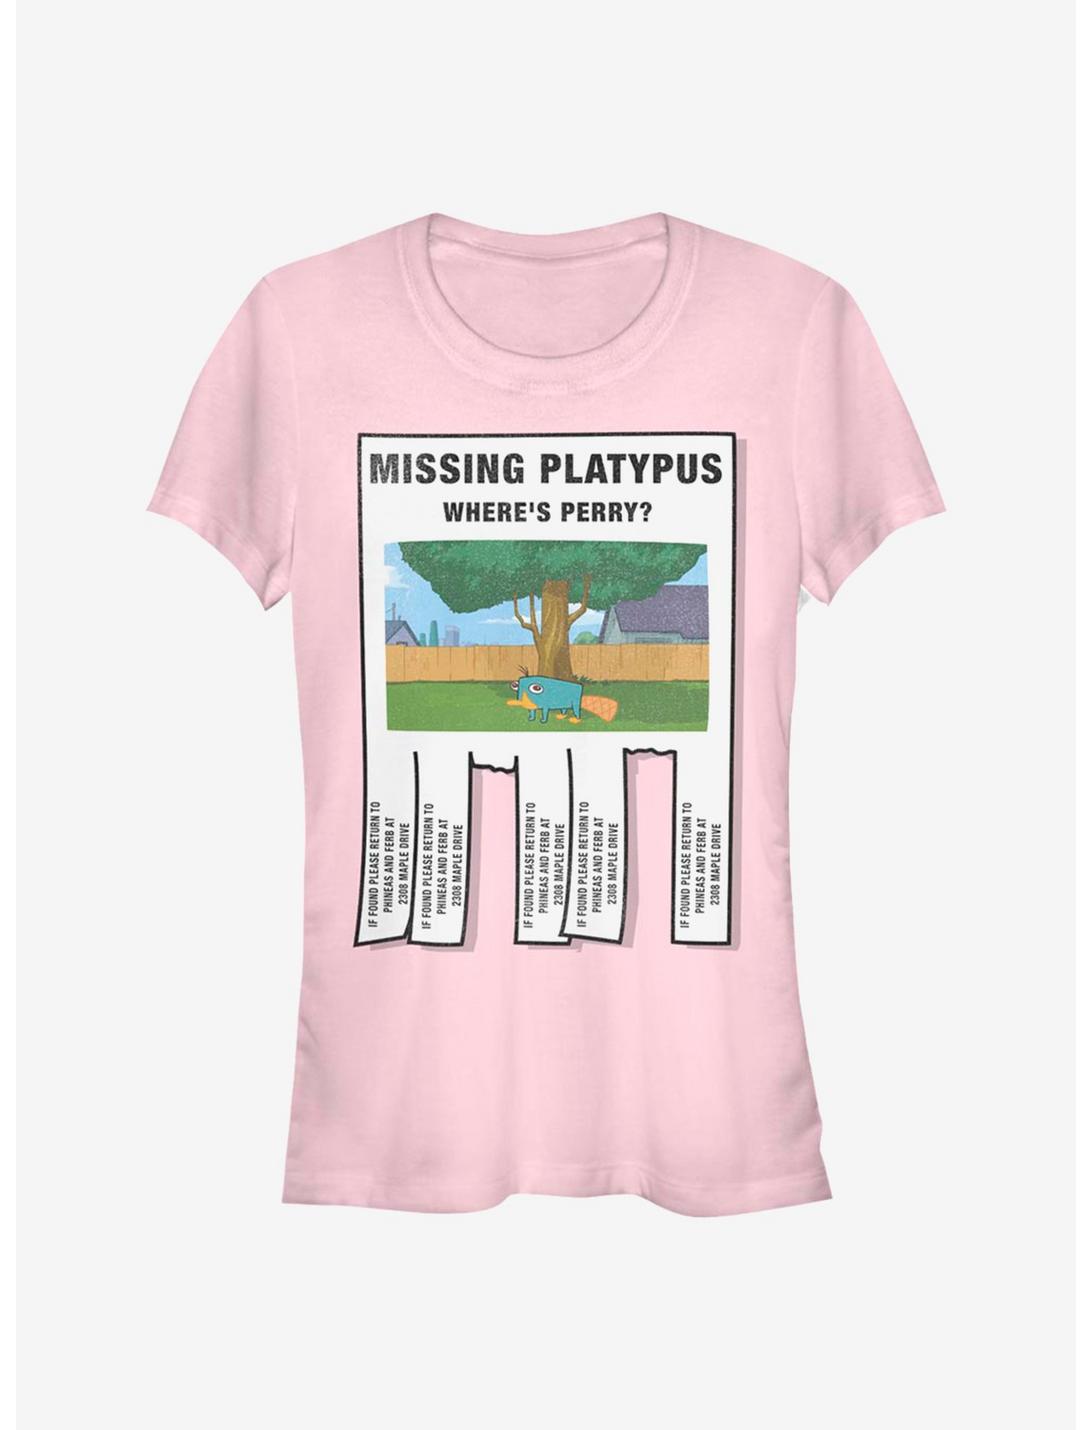 Disney Phineas And Ferb Missing Platypus Girls T-Shirt, LIGHT PINK, hi-res